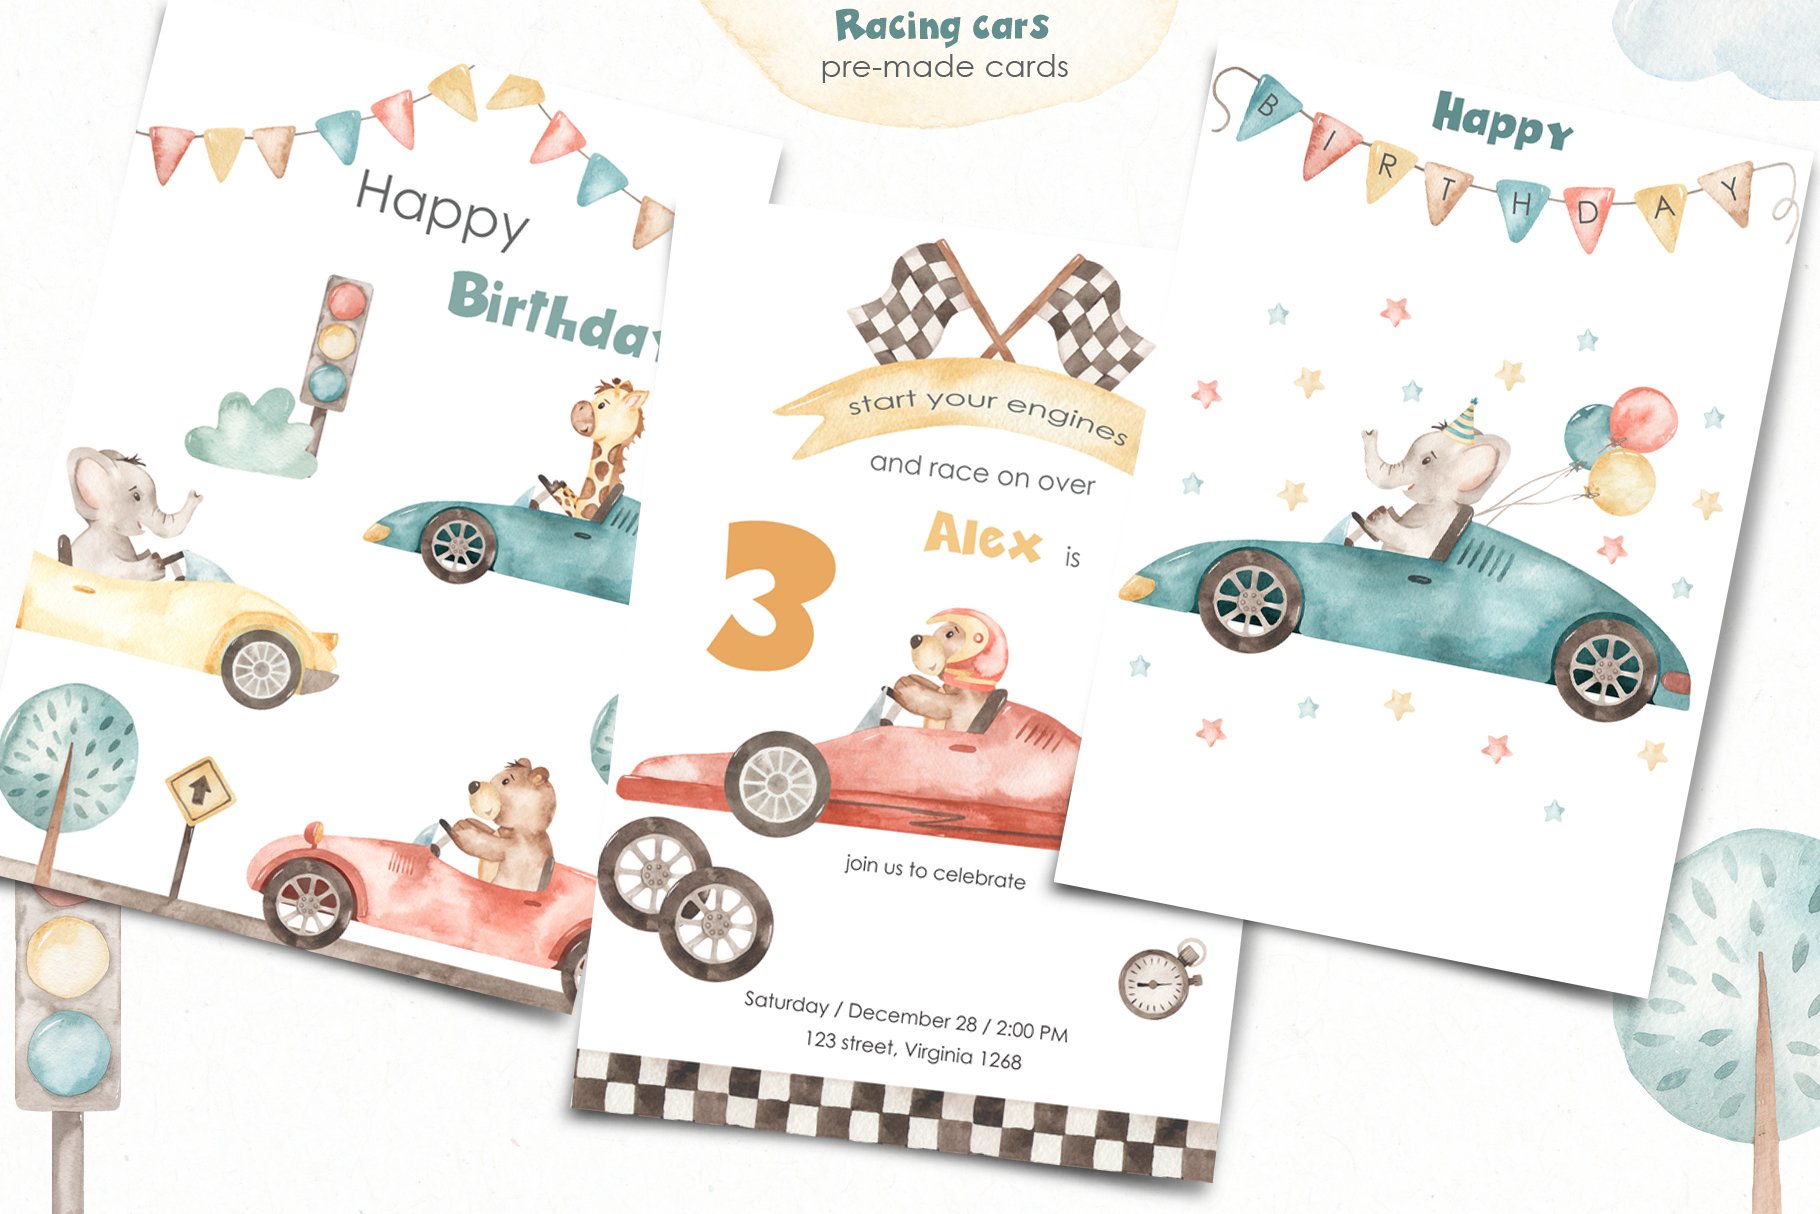 Some options of cards with vintage racing cars.